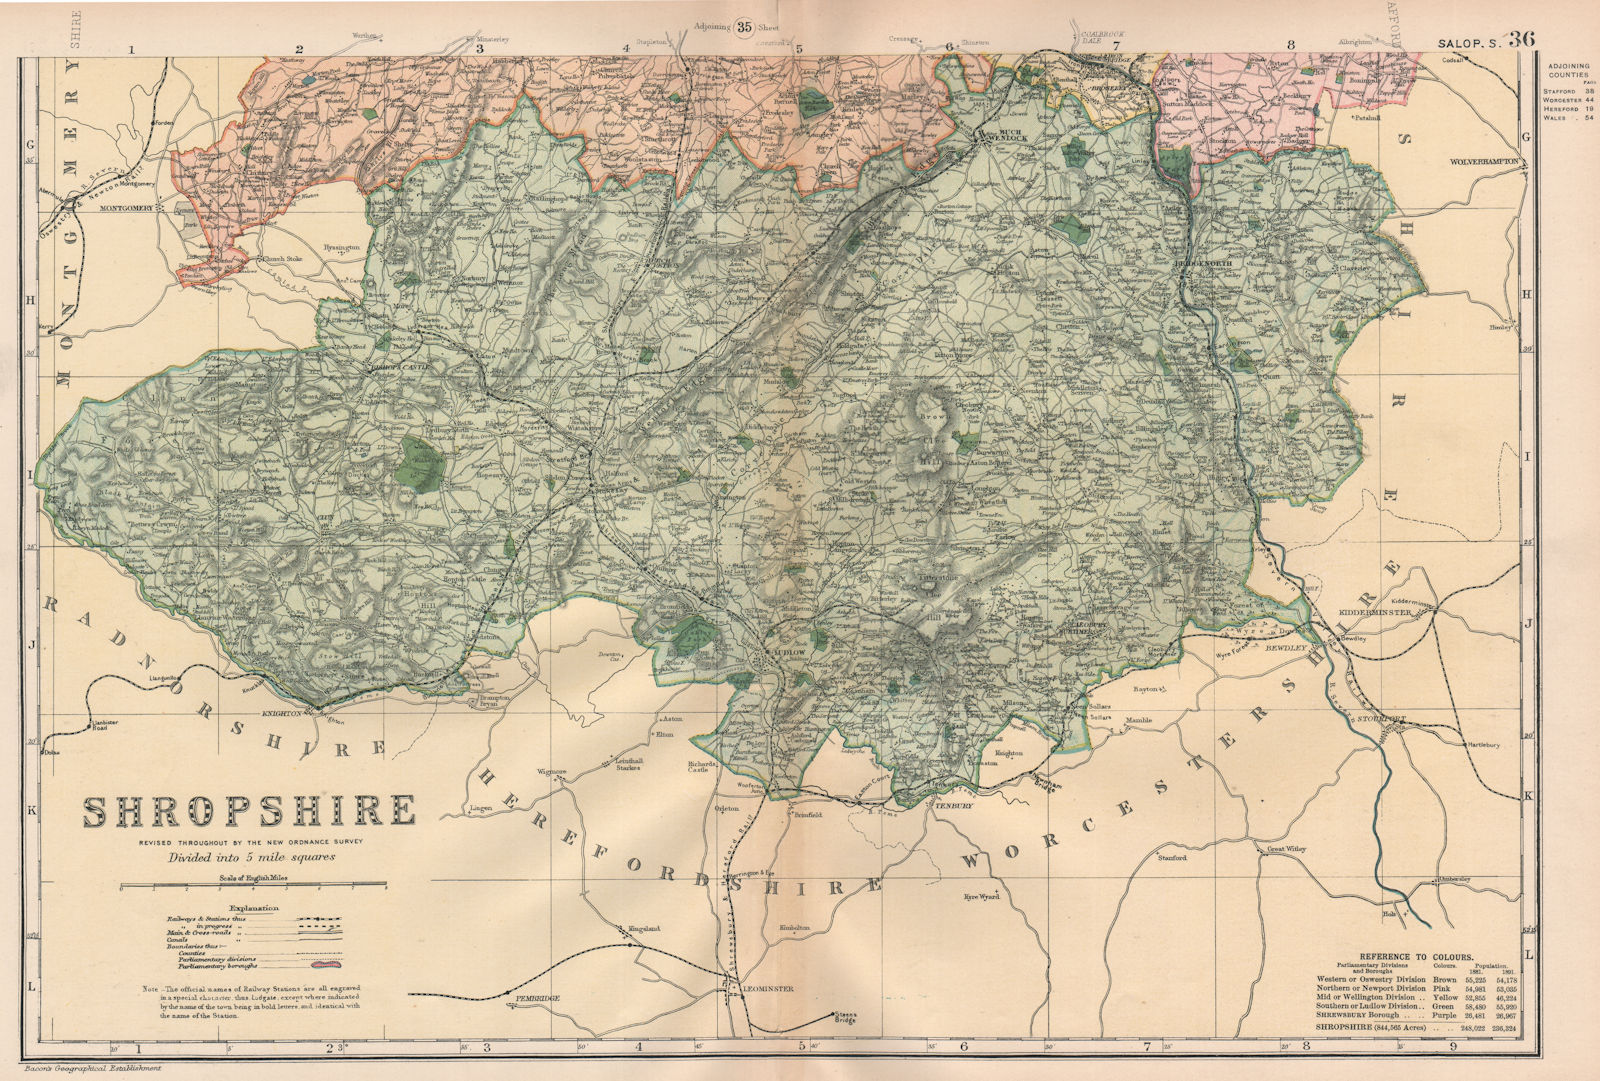 SHROPSHIRE (SOUTH) . Showing Parliamentary divisions & parks. BACON 1896 map